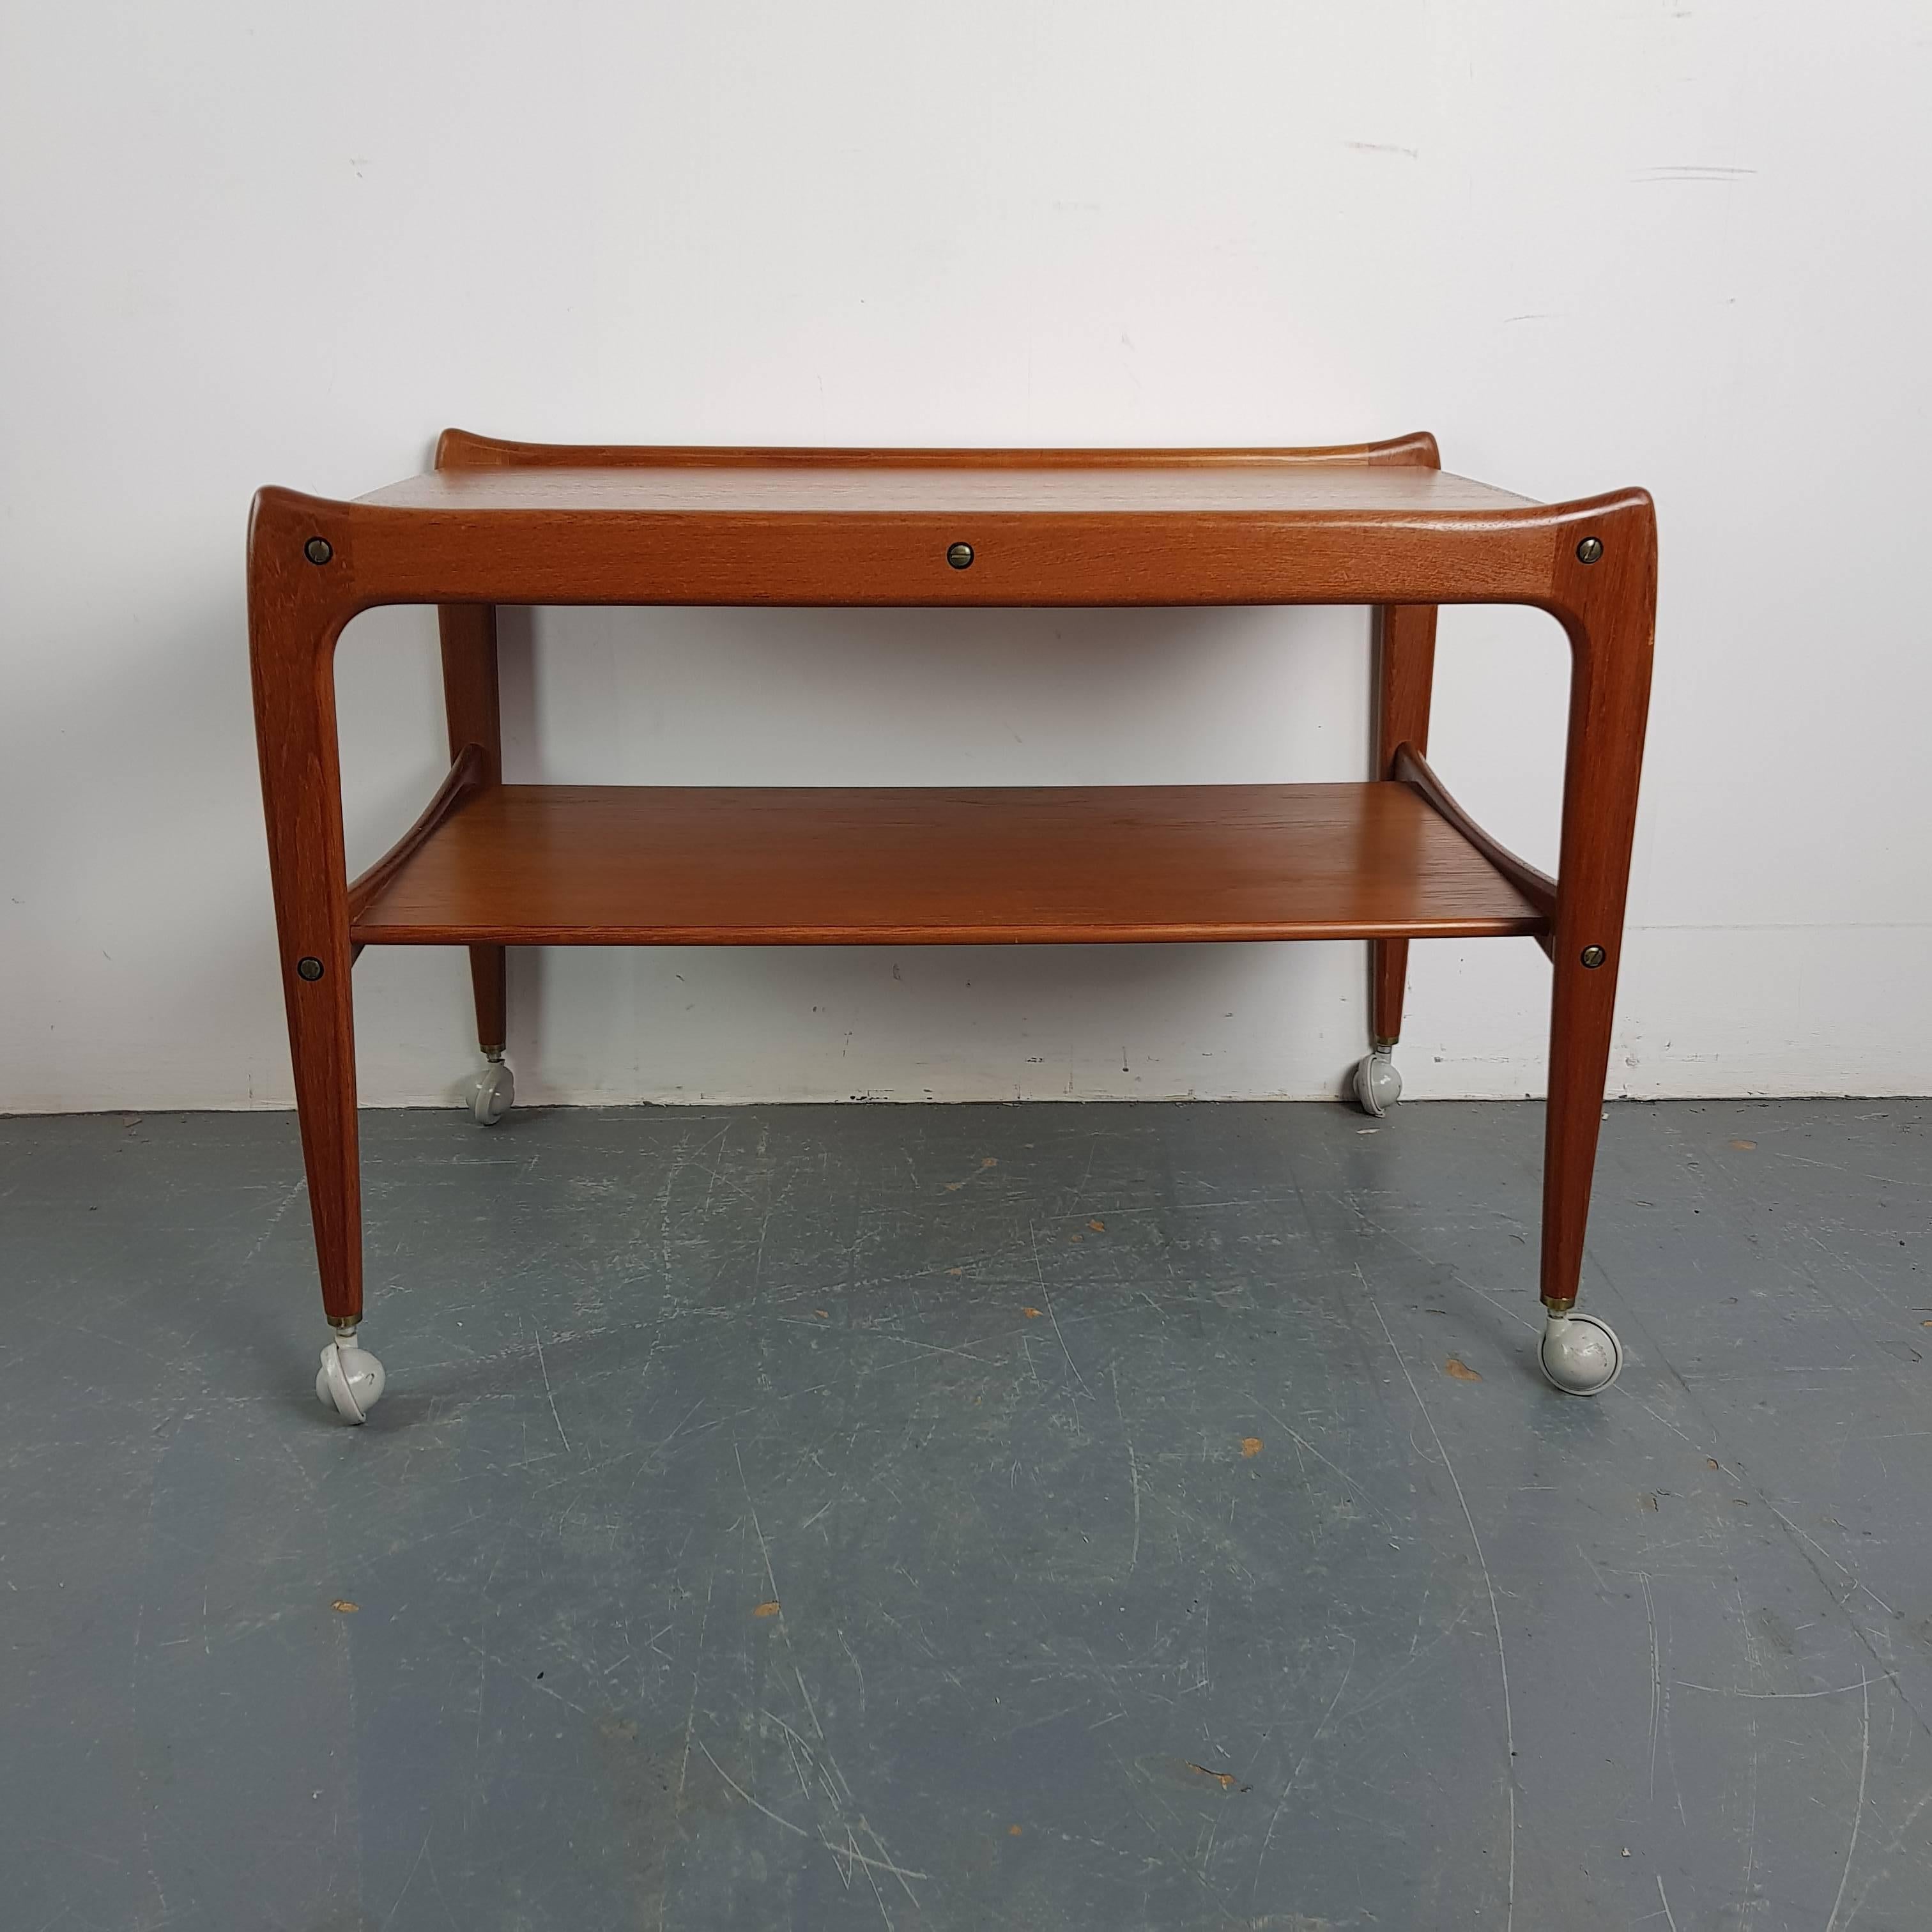 Lovely midcentury drinks trolley. Made of teak with two tiers - on castors.

Approximate dimensions:

Height: 57 cm

Width: 78 cm

Depth: 49 cm.

Shelf height 30 cm.